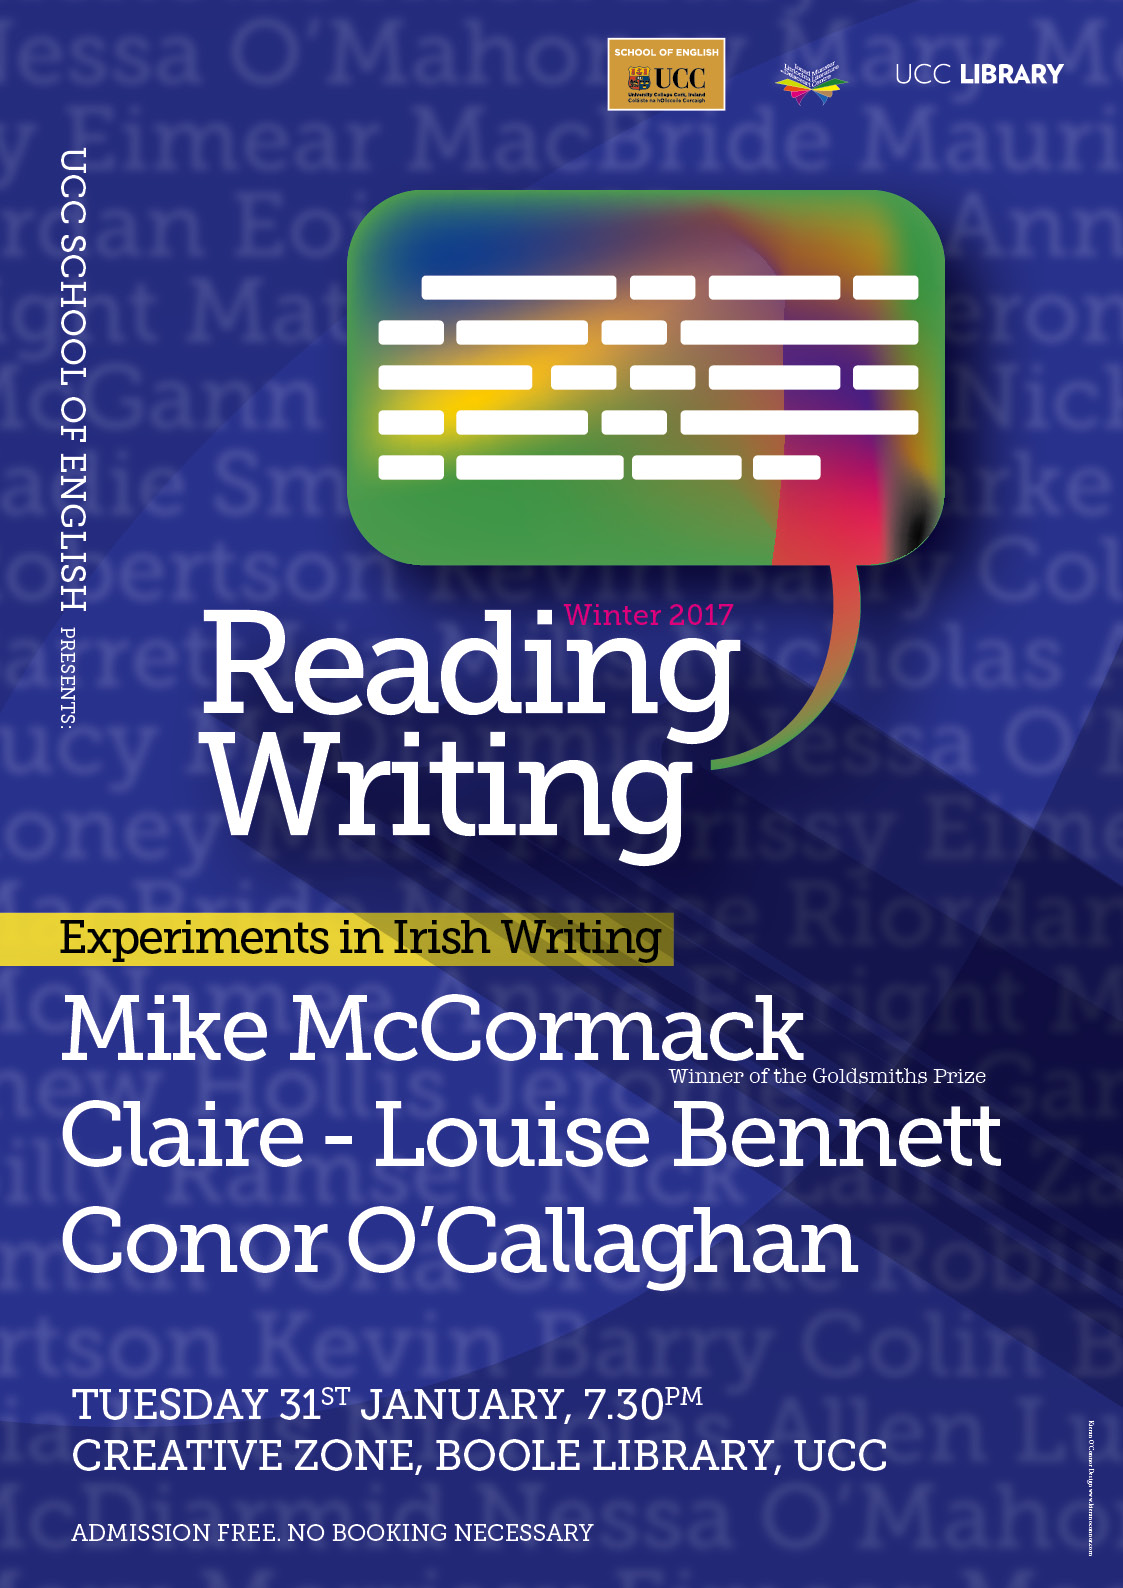 Join us for the second event of UCC’s School of English reading series which will feature three of Ireland’s most experimental writers. 